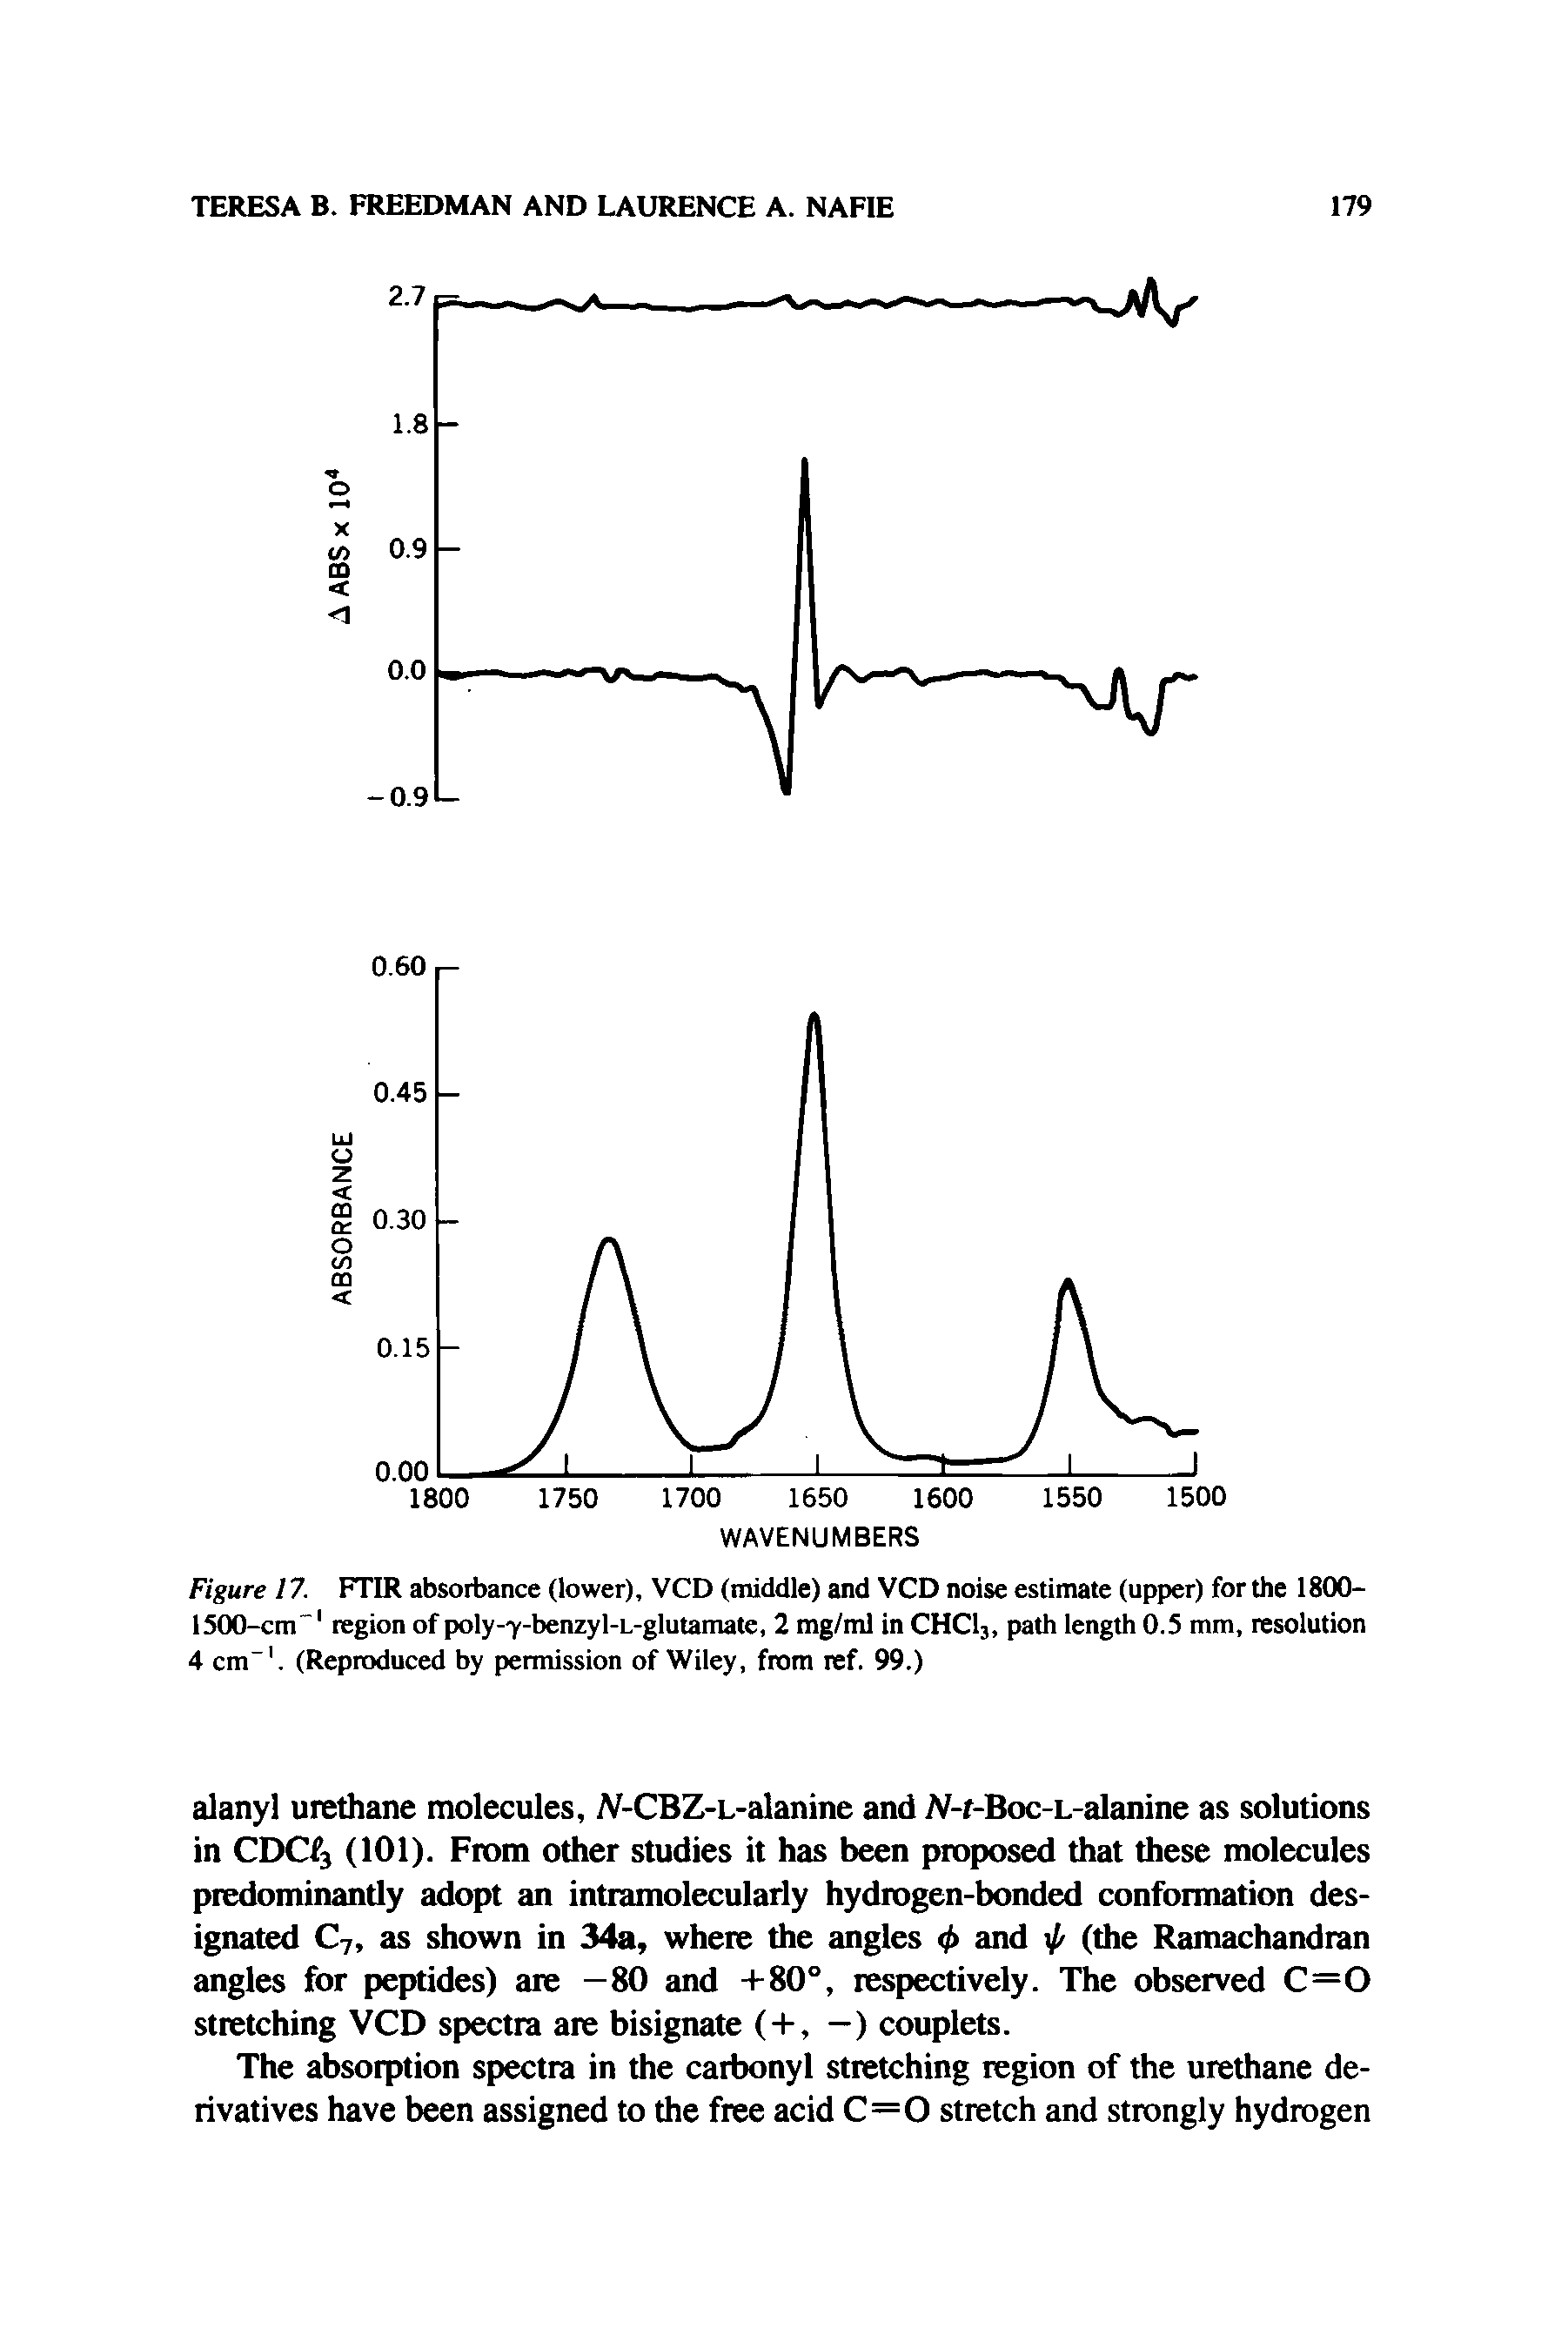 Figure 17. FTIR absorbance (lower), VCD (middle) and VCD noise estimate (upper) for the 1800-1500-cm" region of poly-7-benzyl-L-glutamate, 2 mg/ml in CHCI3, path length 0.5 mm, resolution 4 cm". (Reproduced by permission of Wiley, from ref. 99.)...